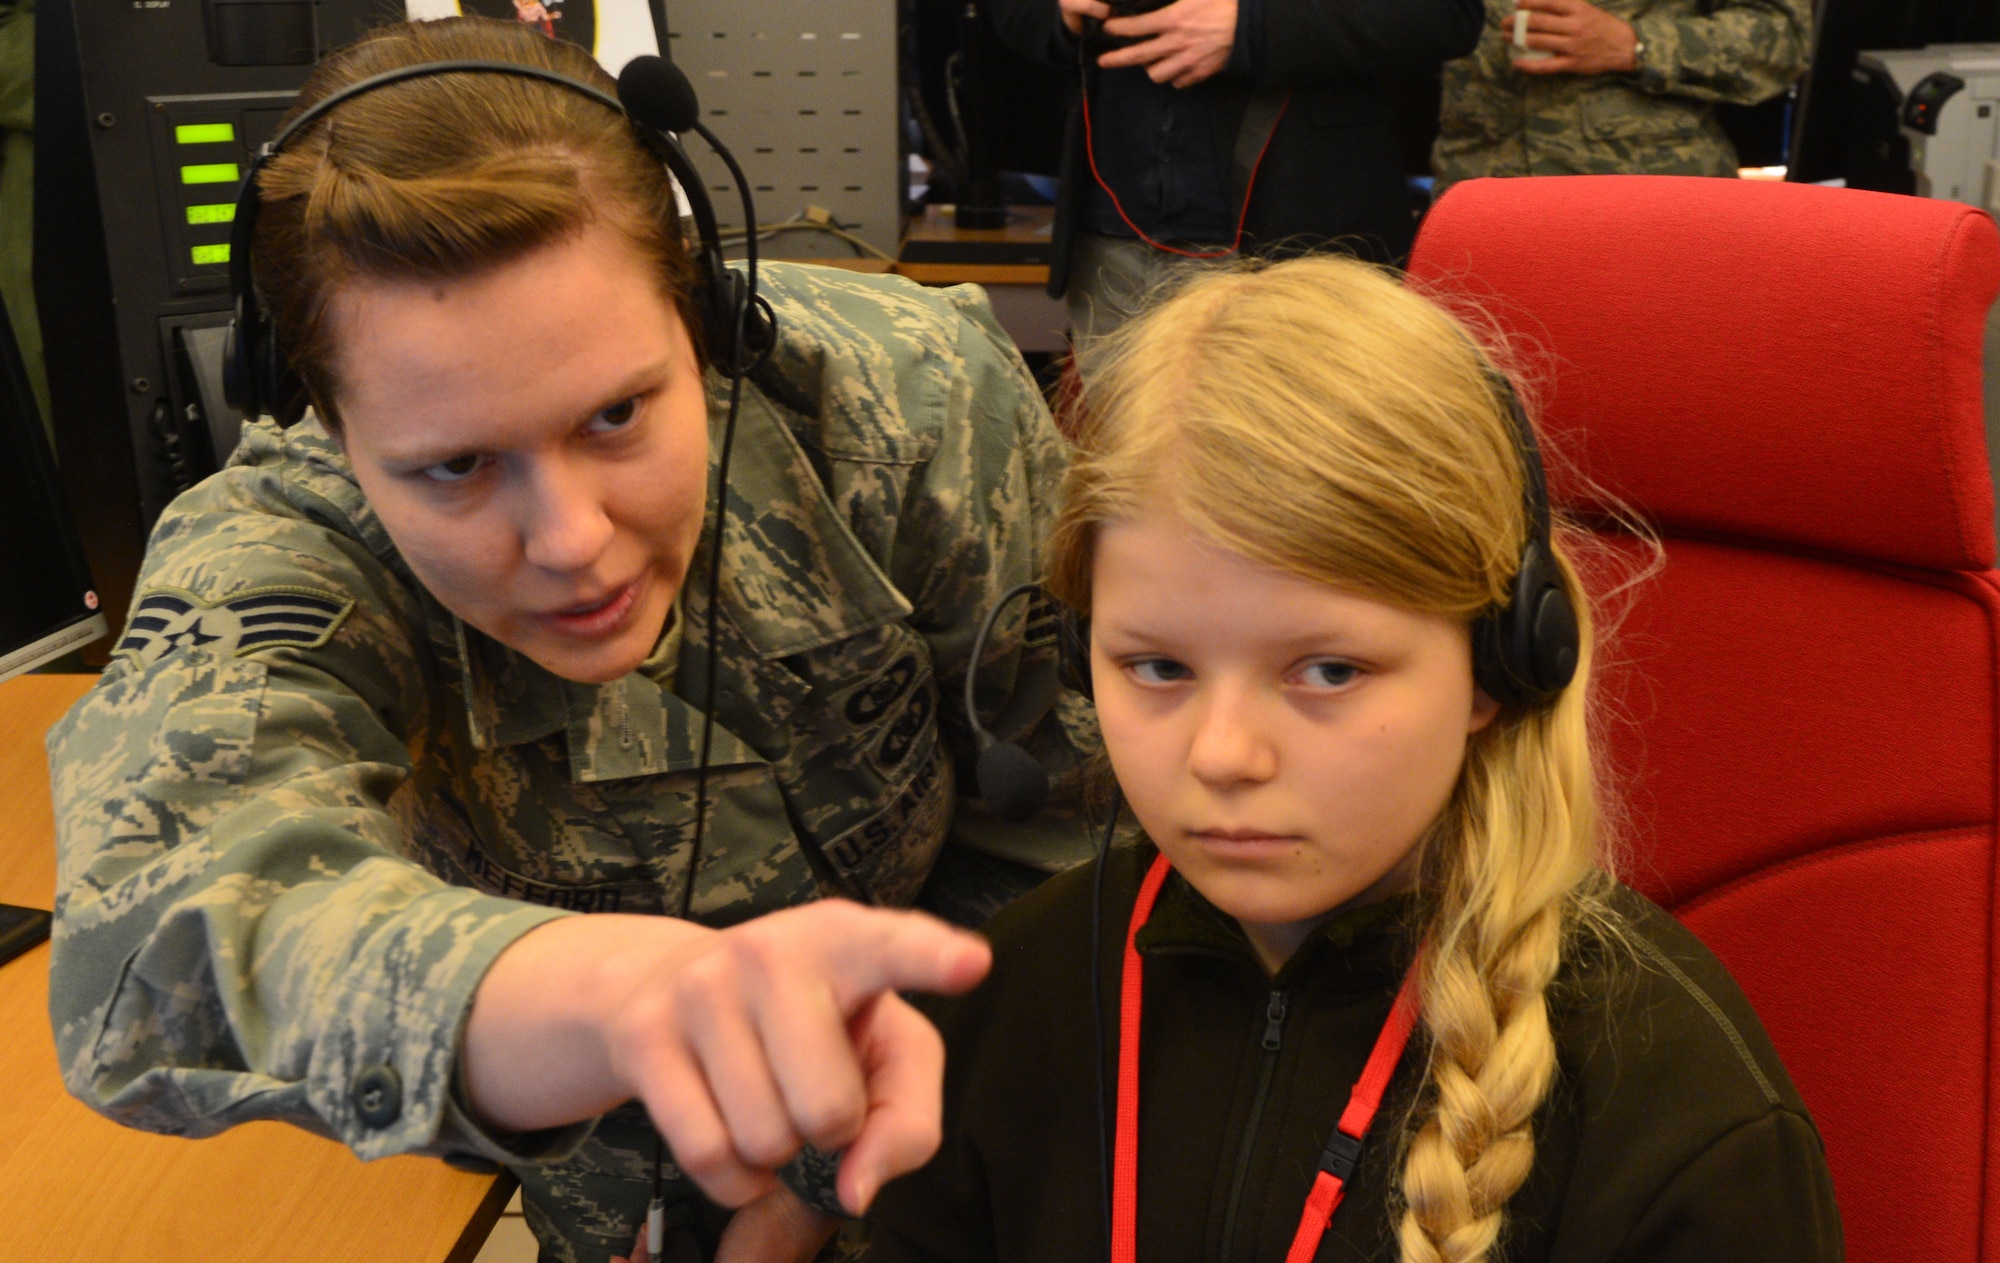 U.S. Air Force Senior Airman Jessica Mefford, 871st Air Expeditionary Squadron, shows Arna Tryggvadóttir, Pilot for a Day participant, how to operate systems at the Control and Reporting Center during the program at Keflavik International Airport, Iceland, May 13, 2015. As part of the program, both children toured the CRC and participated in a simulated mission. (U.S. Air Force photo by 2nd Lt. Meredith Mulvihill/Released)